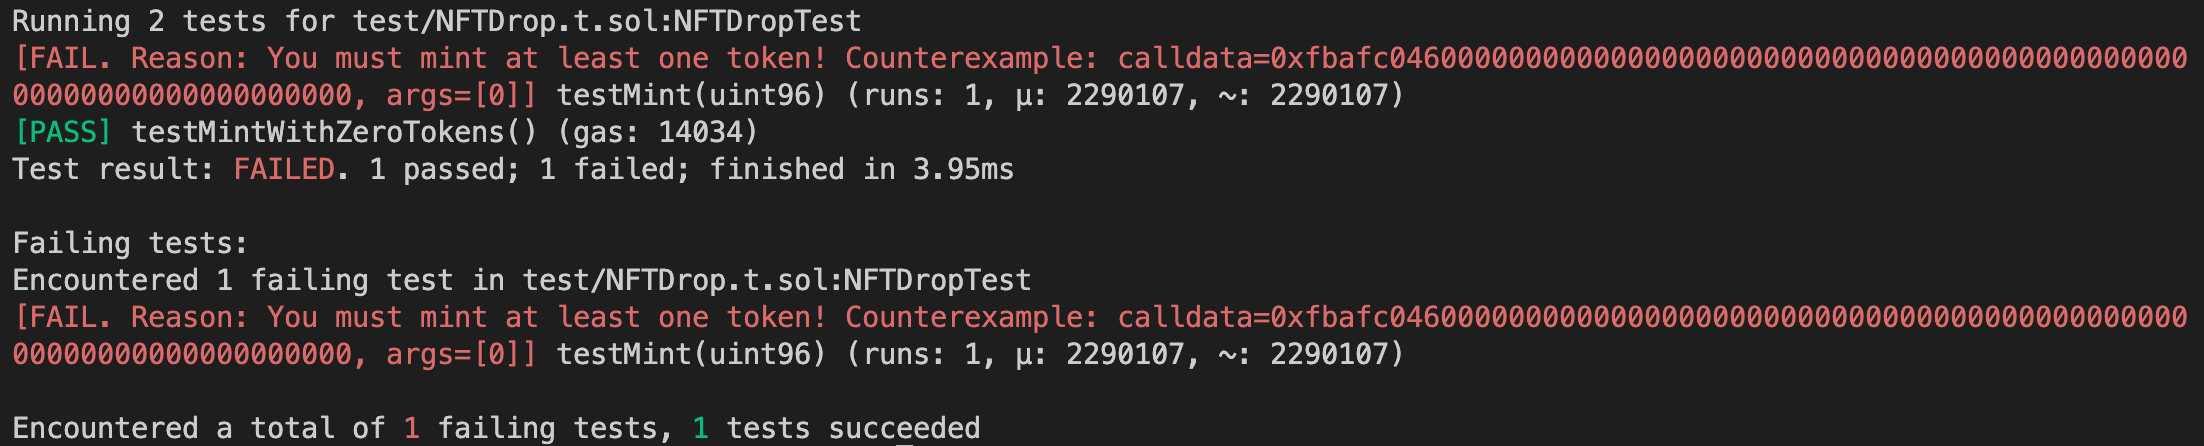 The test fails as it includes 0 as part of the fuzzed input